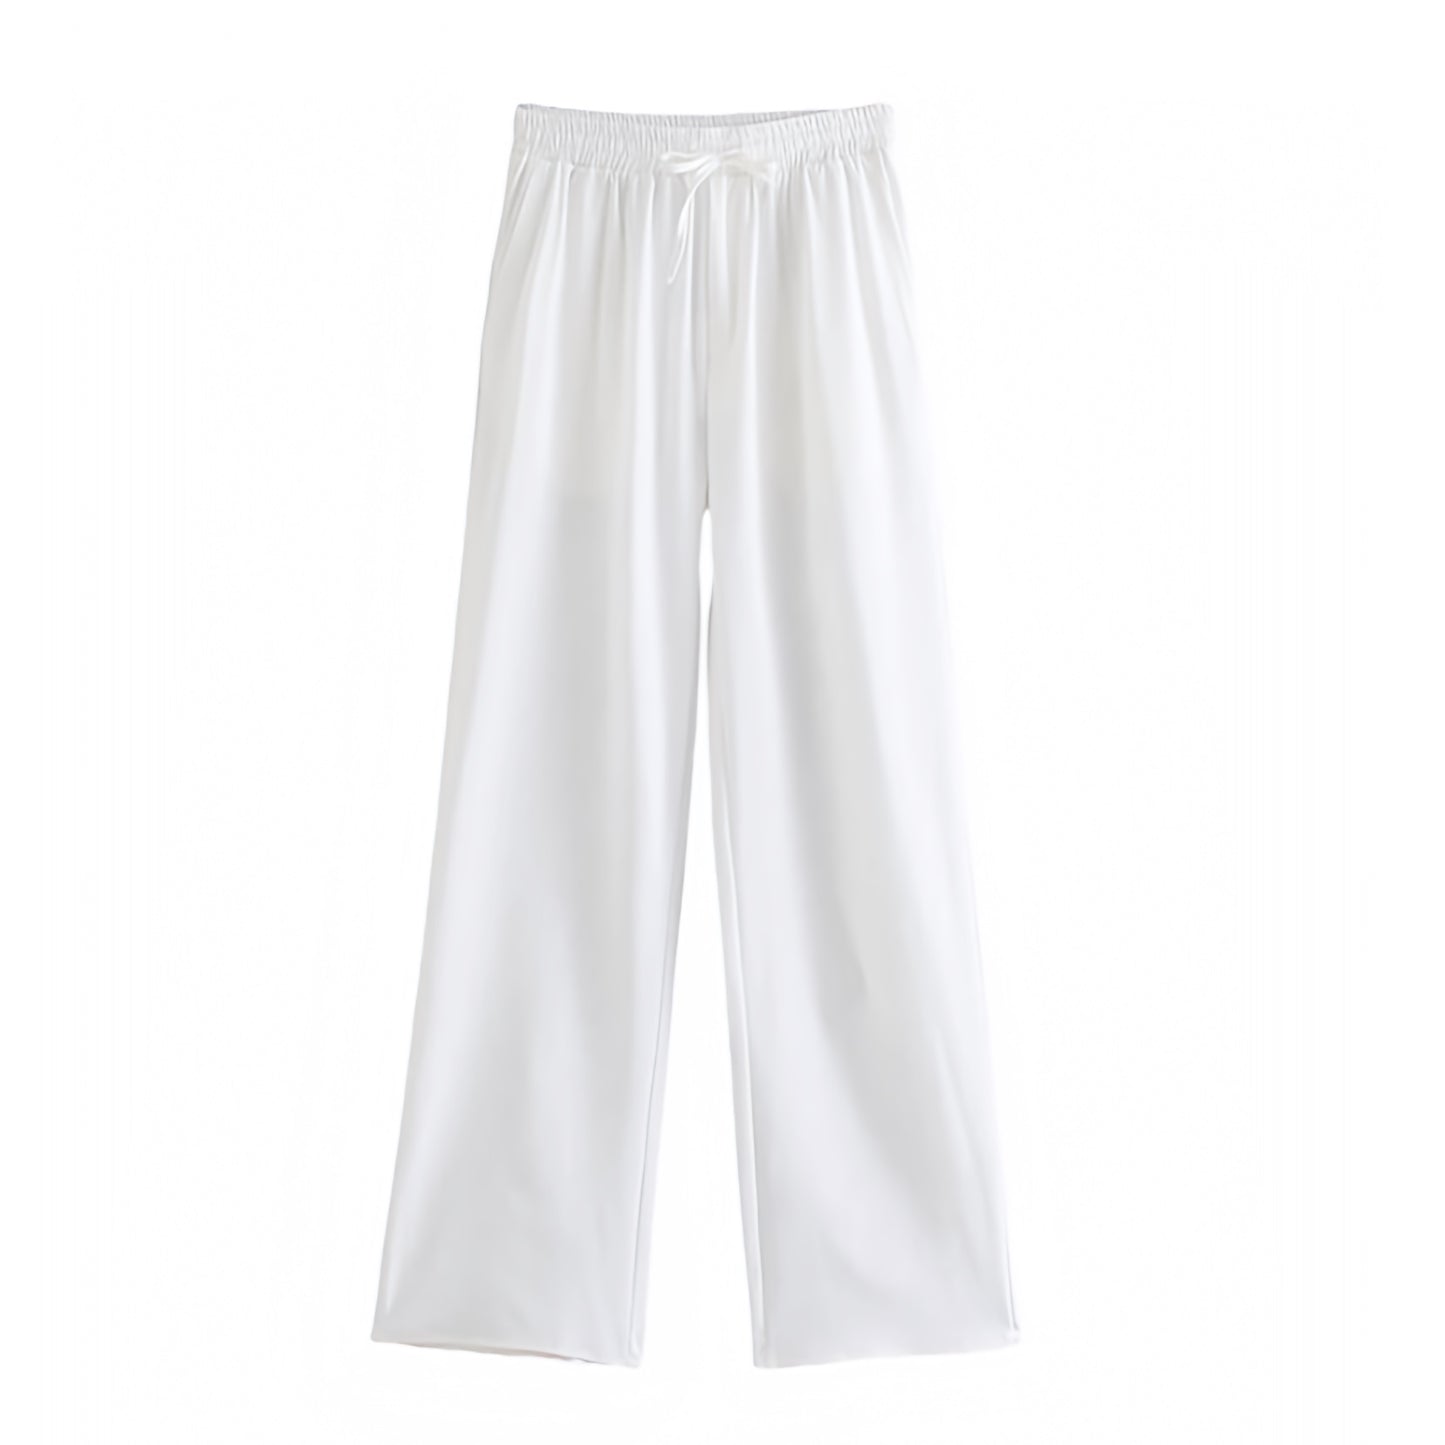 white-ivory-cotton-linen-mid-low-rise-waisted-draw-string-tie-fitted-waist-straight-wide-leg-loose-trouser-pants-joggers-sweatpants-with-pockets-comfortable-cozy-women-ladies-chic-trendy-spring-2024-summer-elegant-casual-feminine-lounge-european-vacation-beach-wear-coastal-granddaughter-zara-revolve-aritzia-brandy-melville-pacsun